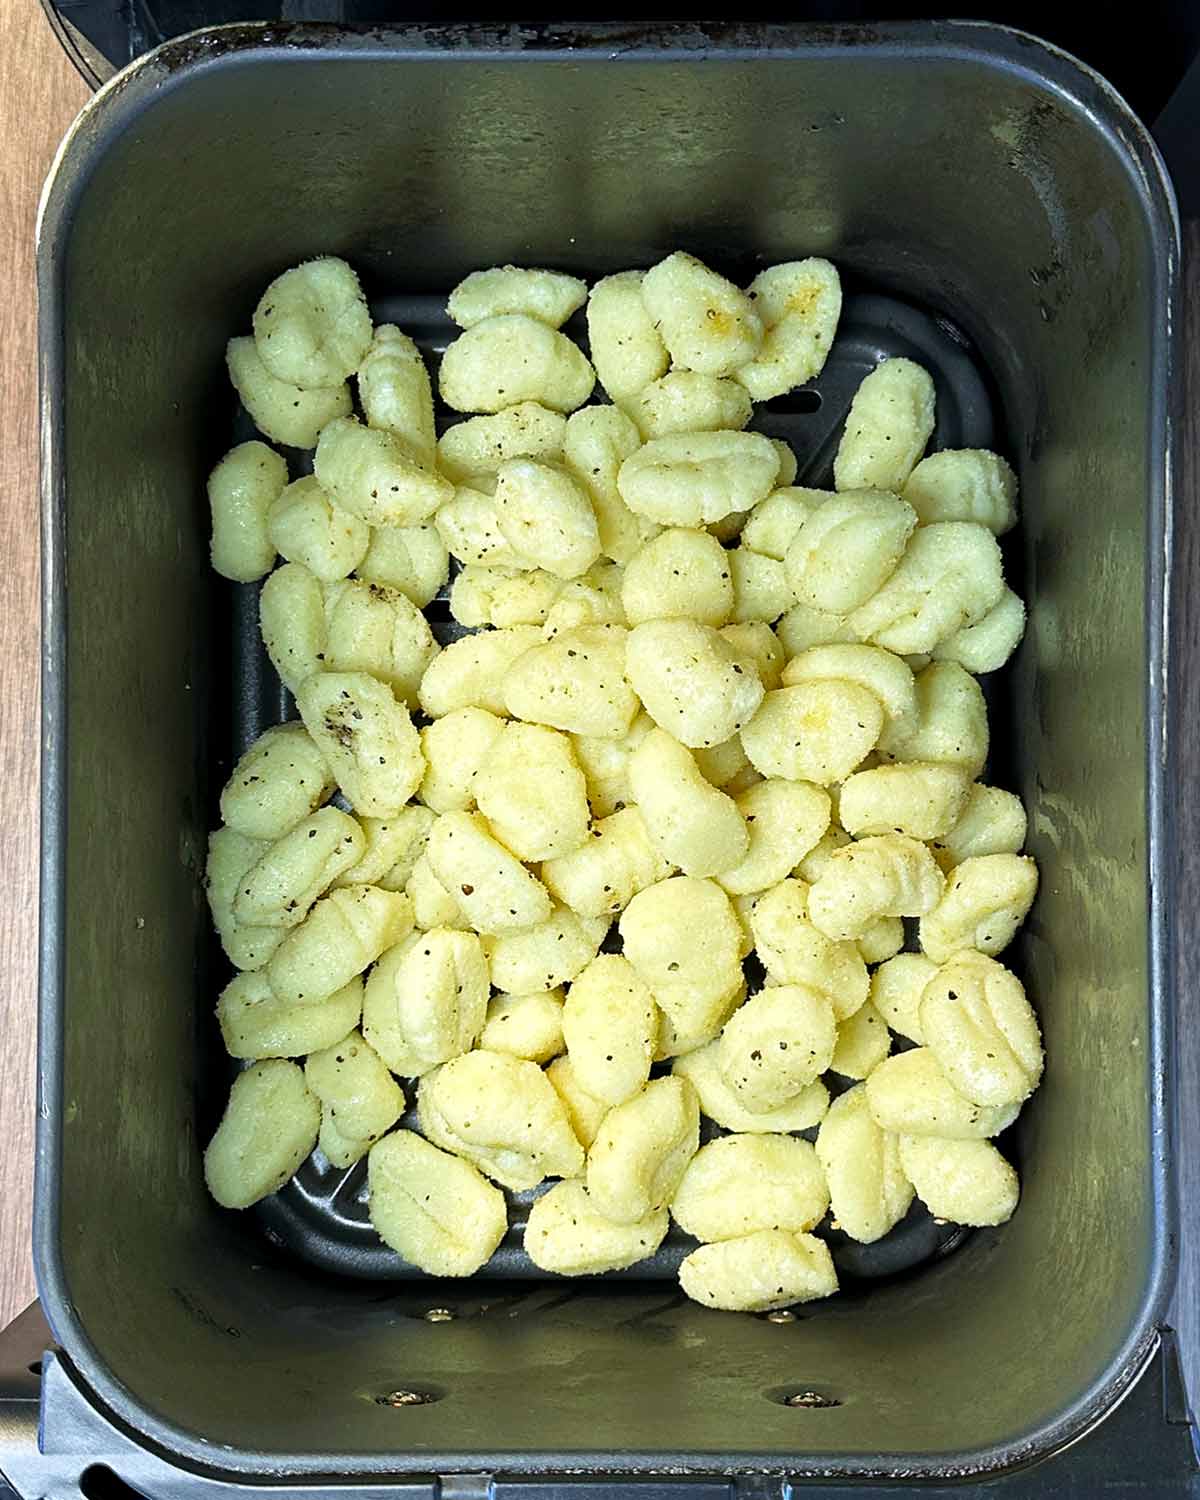 Coated gnocchi in an air fryer basket.